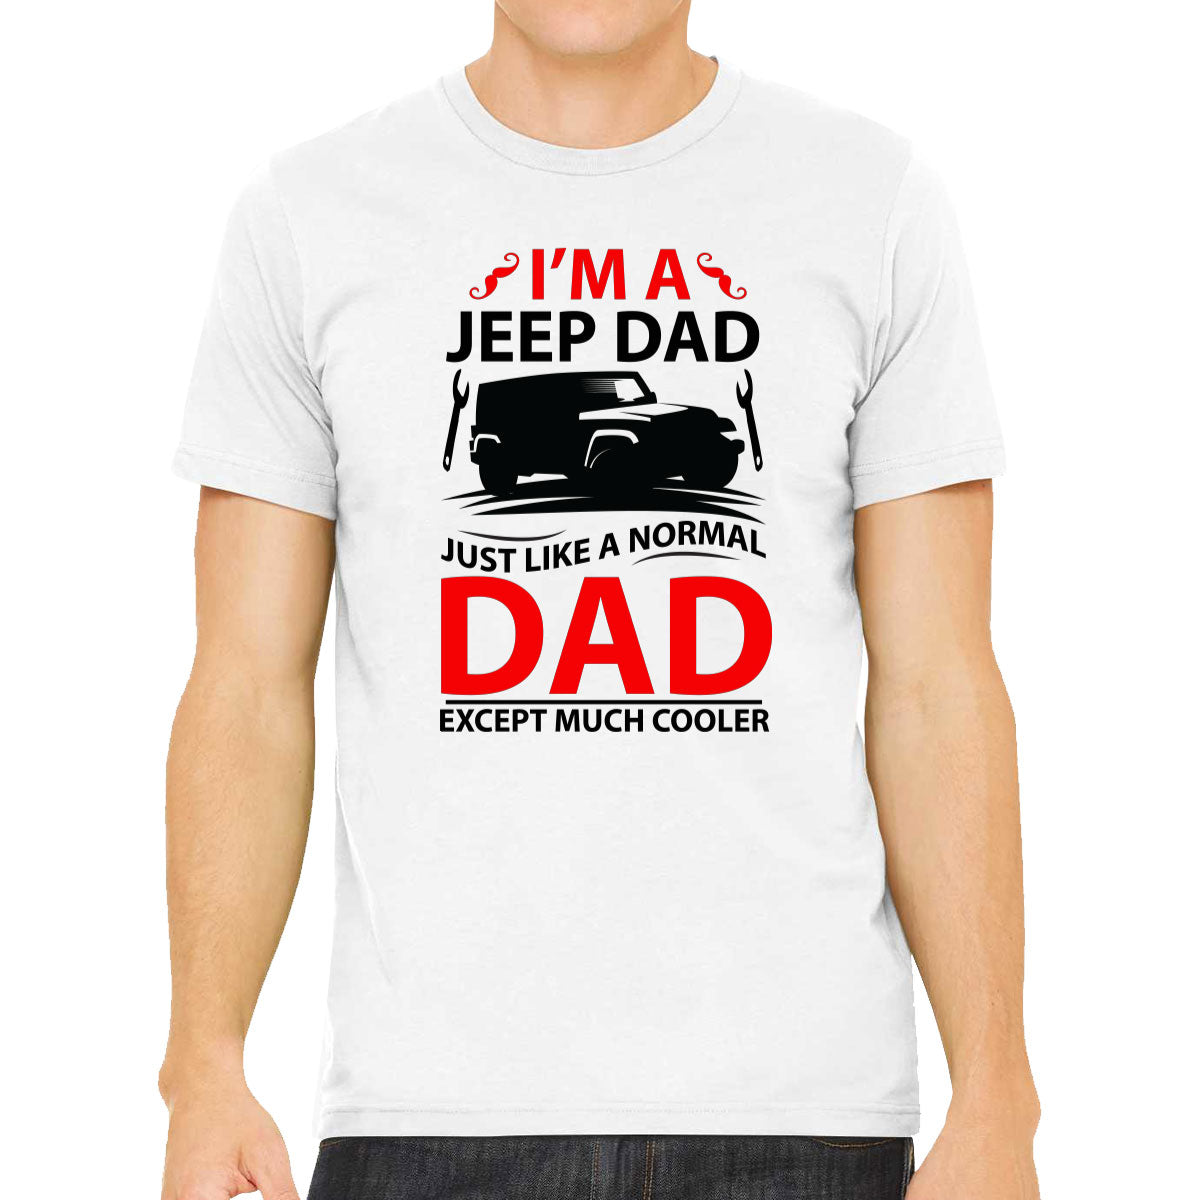 I'm A Jeep Dad Just Like A Normal Dad Except Much Cooler Men's T-shirt